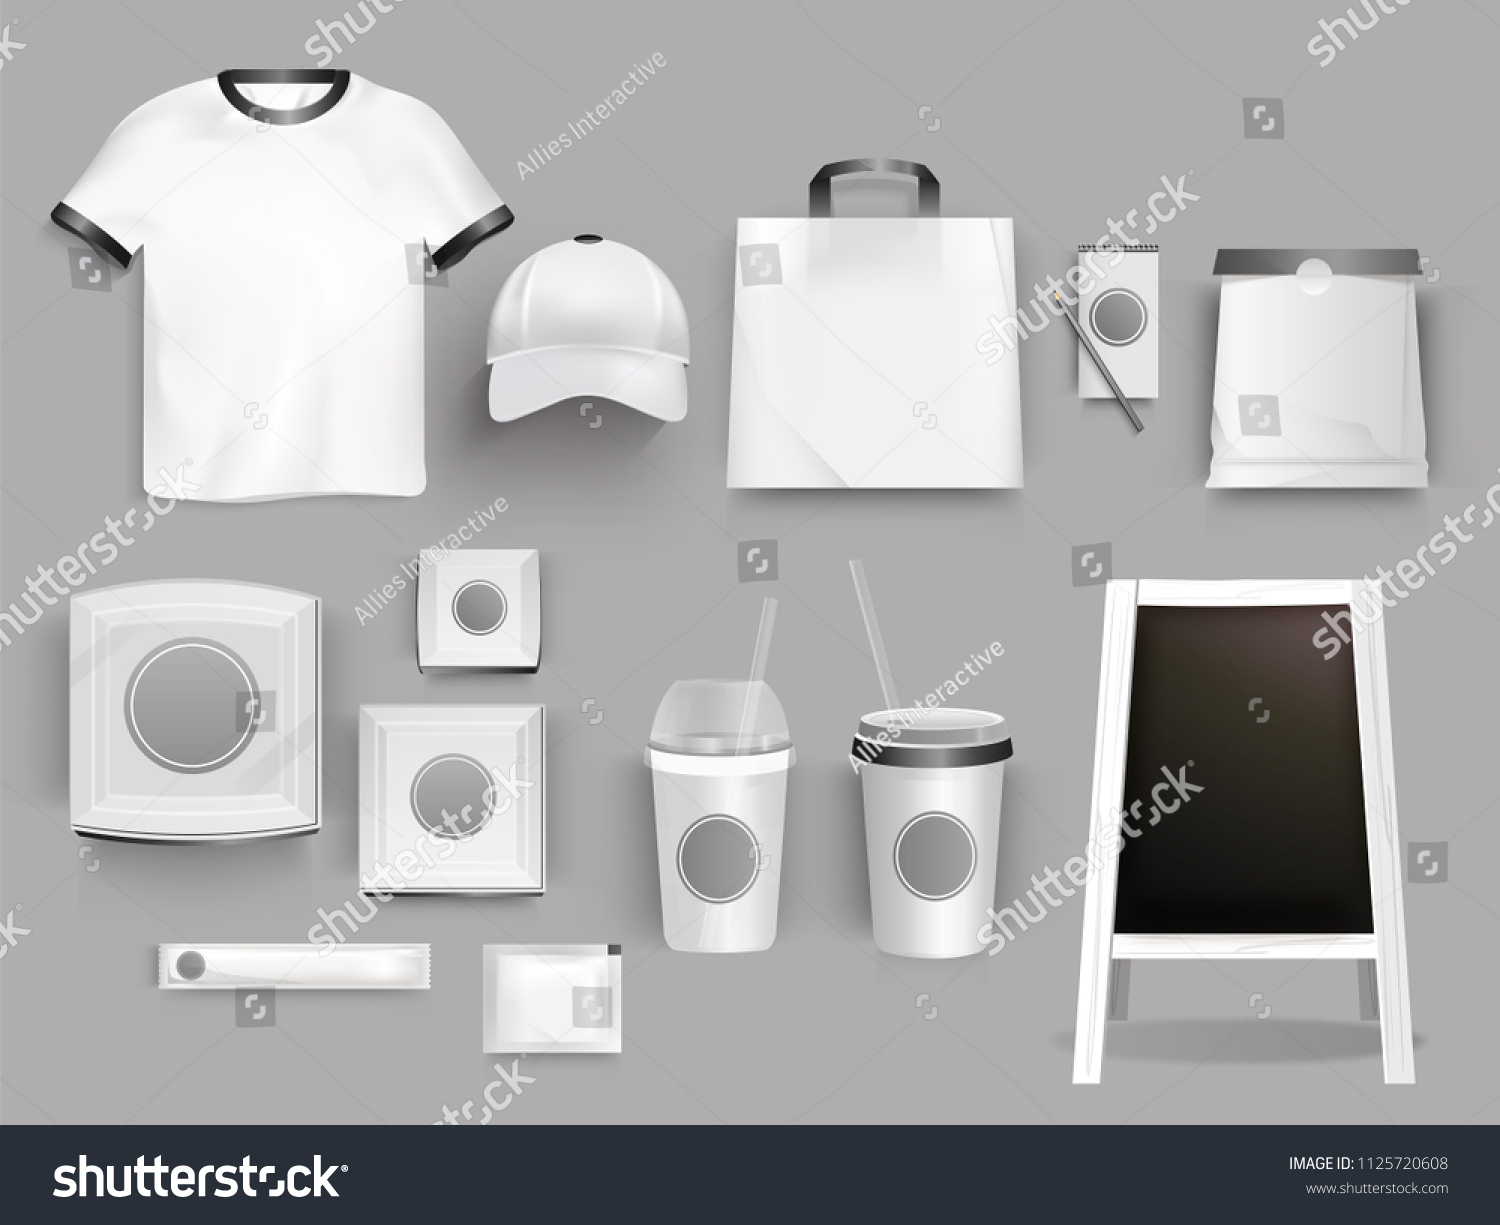 Creative collection of corporate identity template with illustration of t-shirt, bag, paper cup and cap for branding or business promotional concept. #1125720608